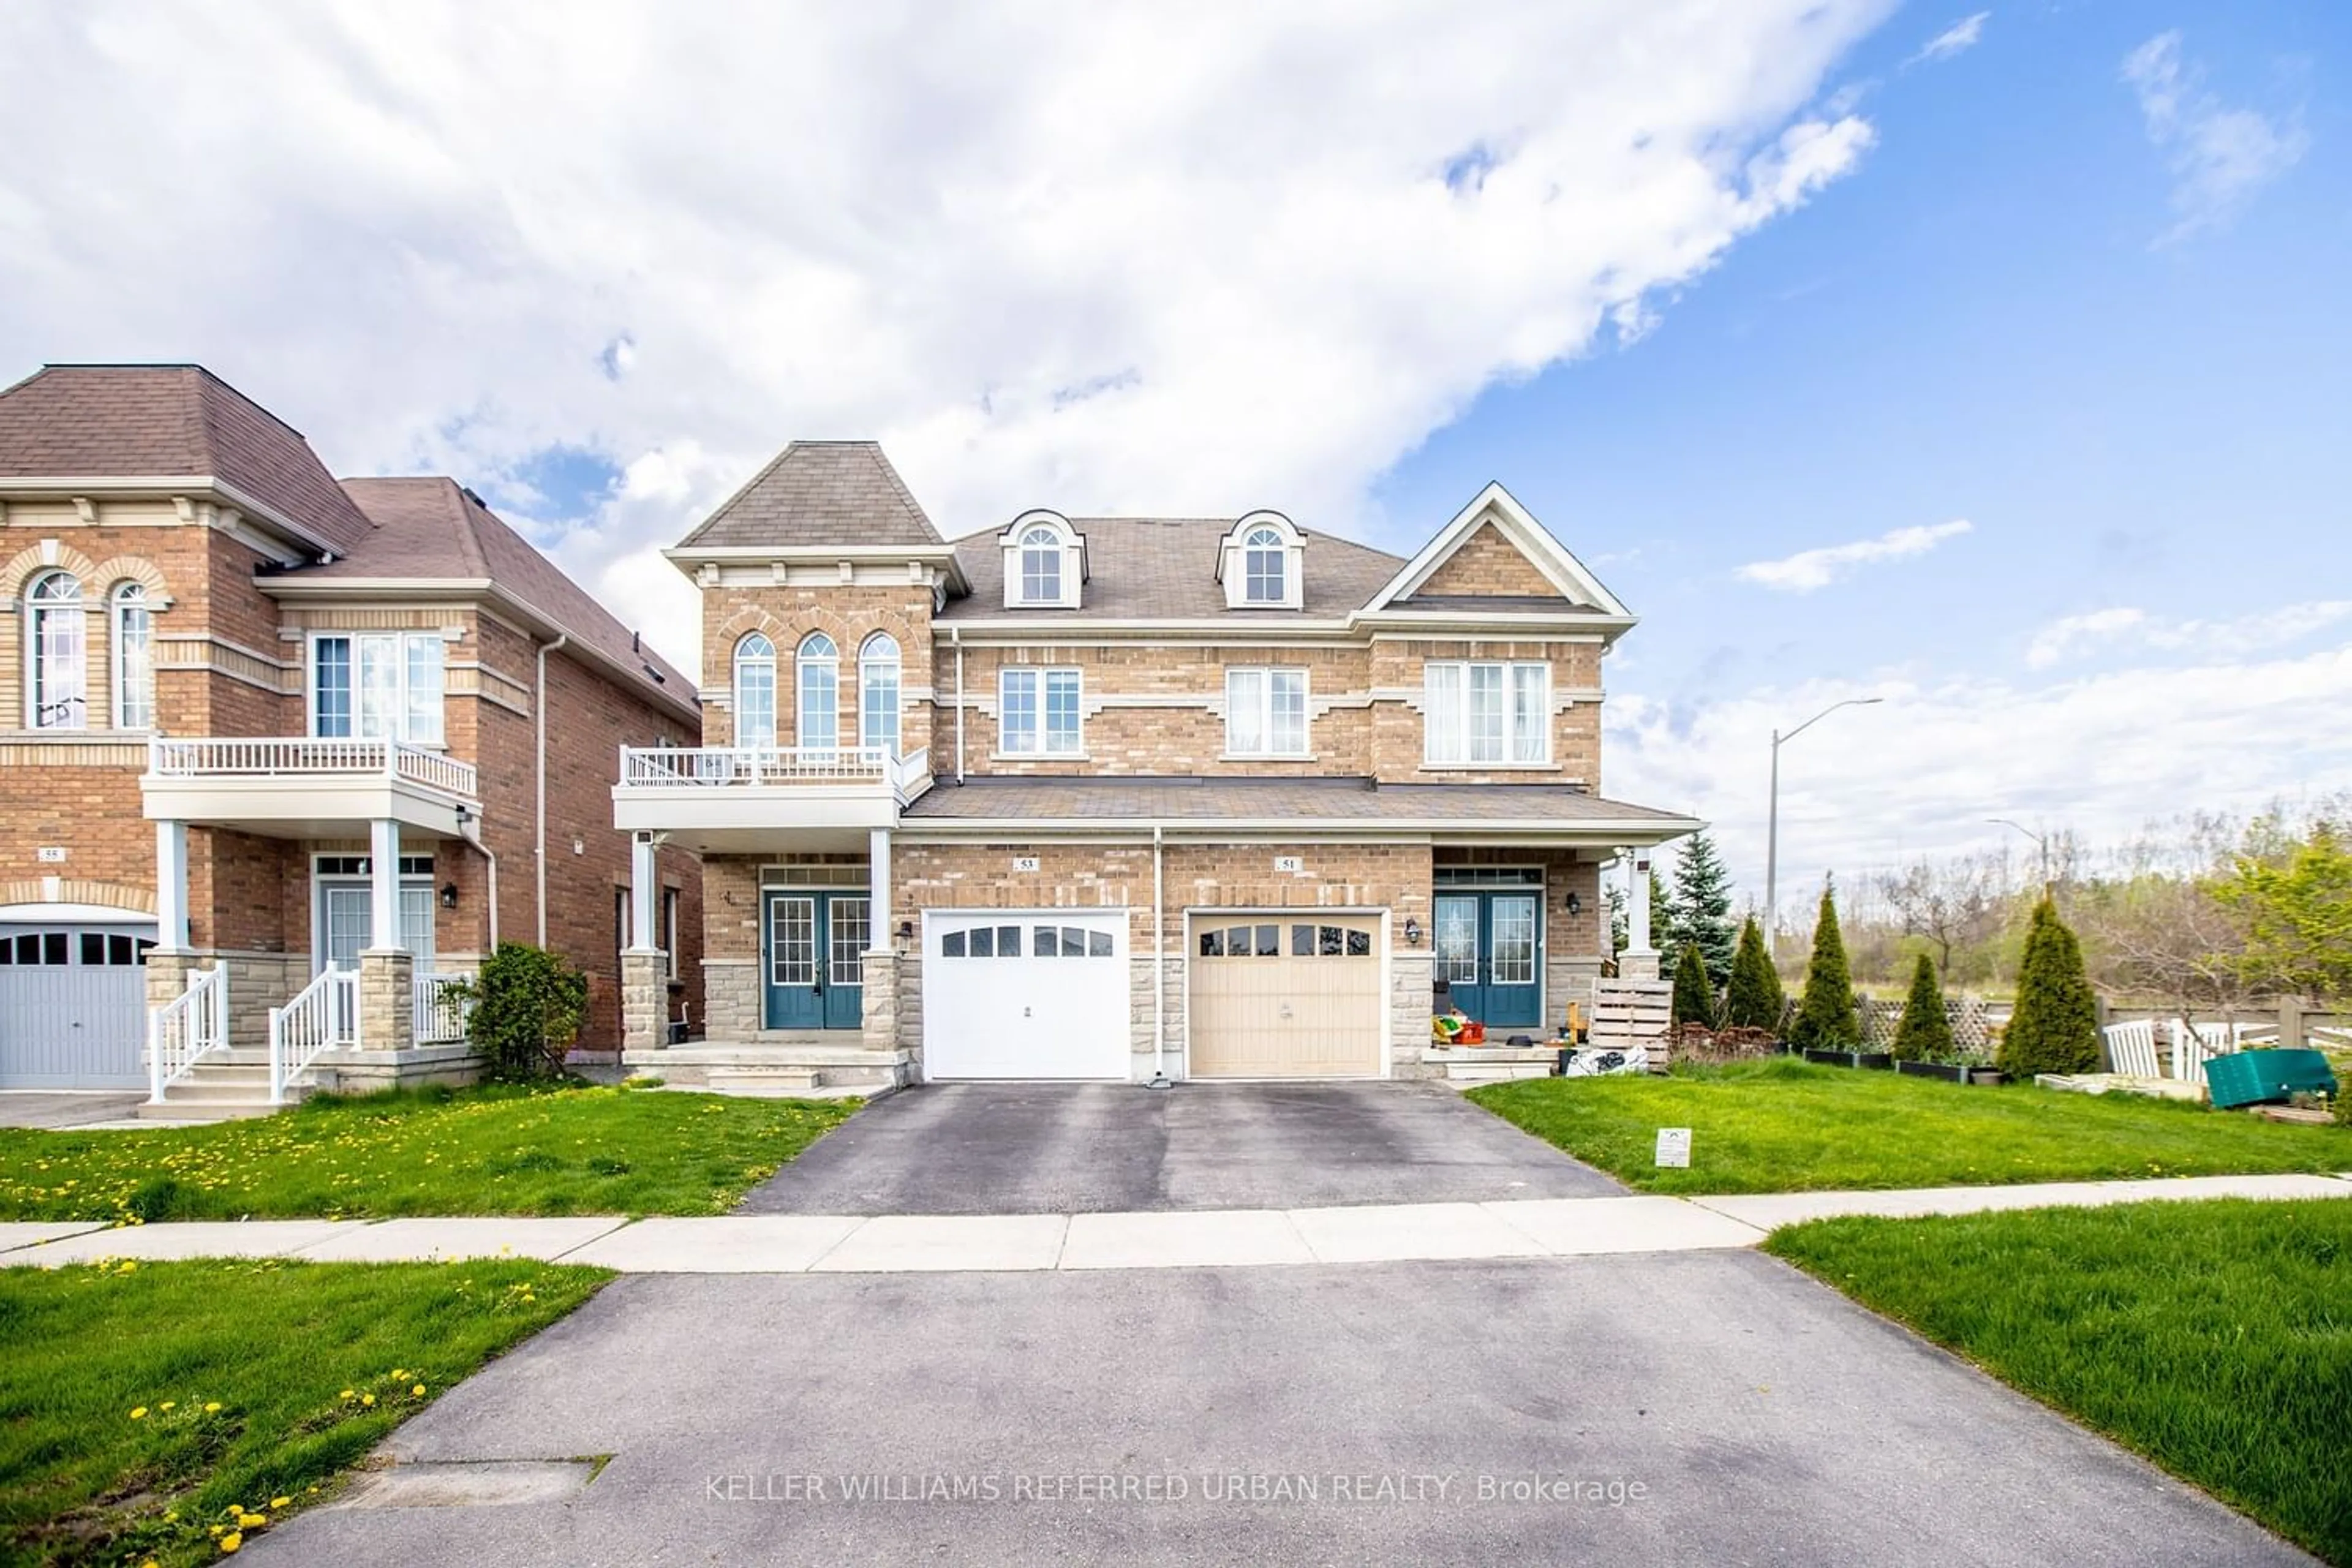 Home with brick exterior material for 53 Turnhouse Cres, Markham Ontario L6B 0S6